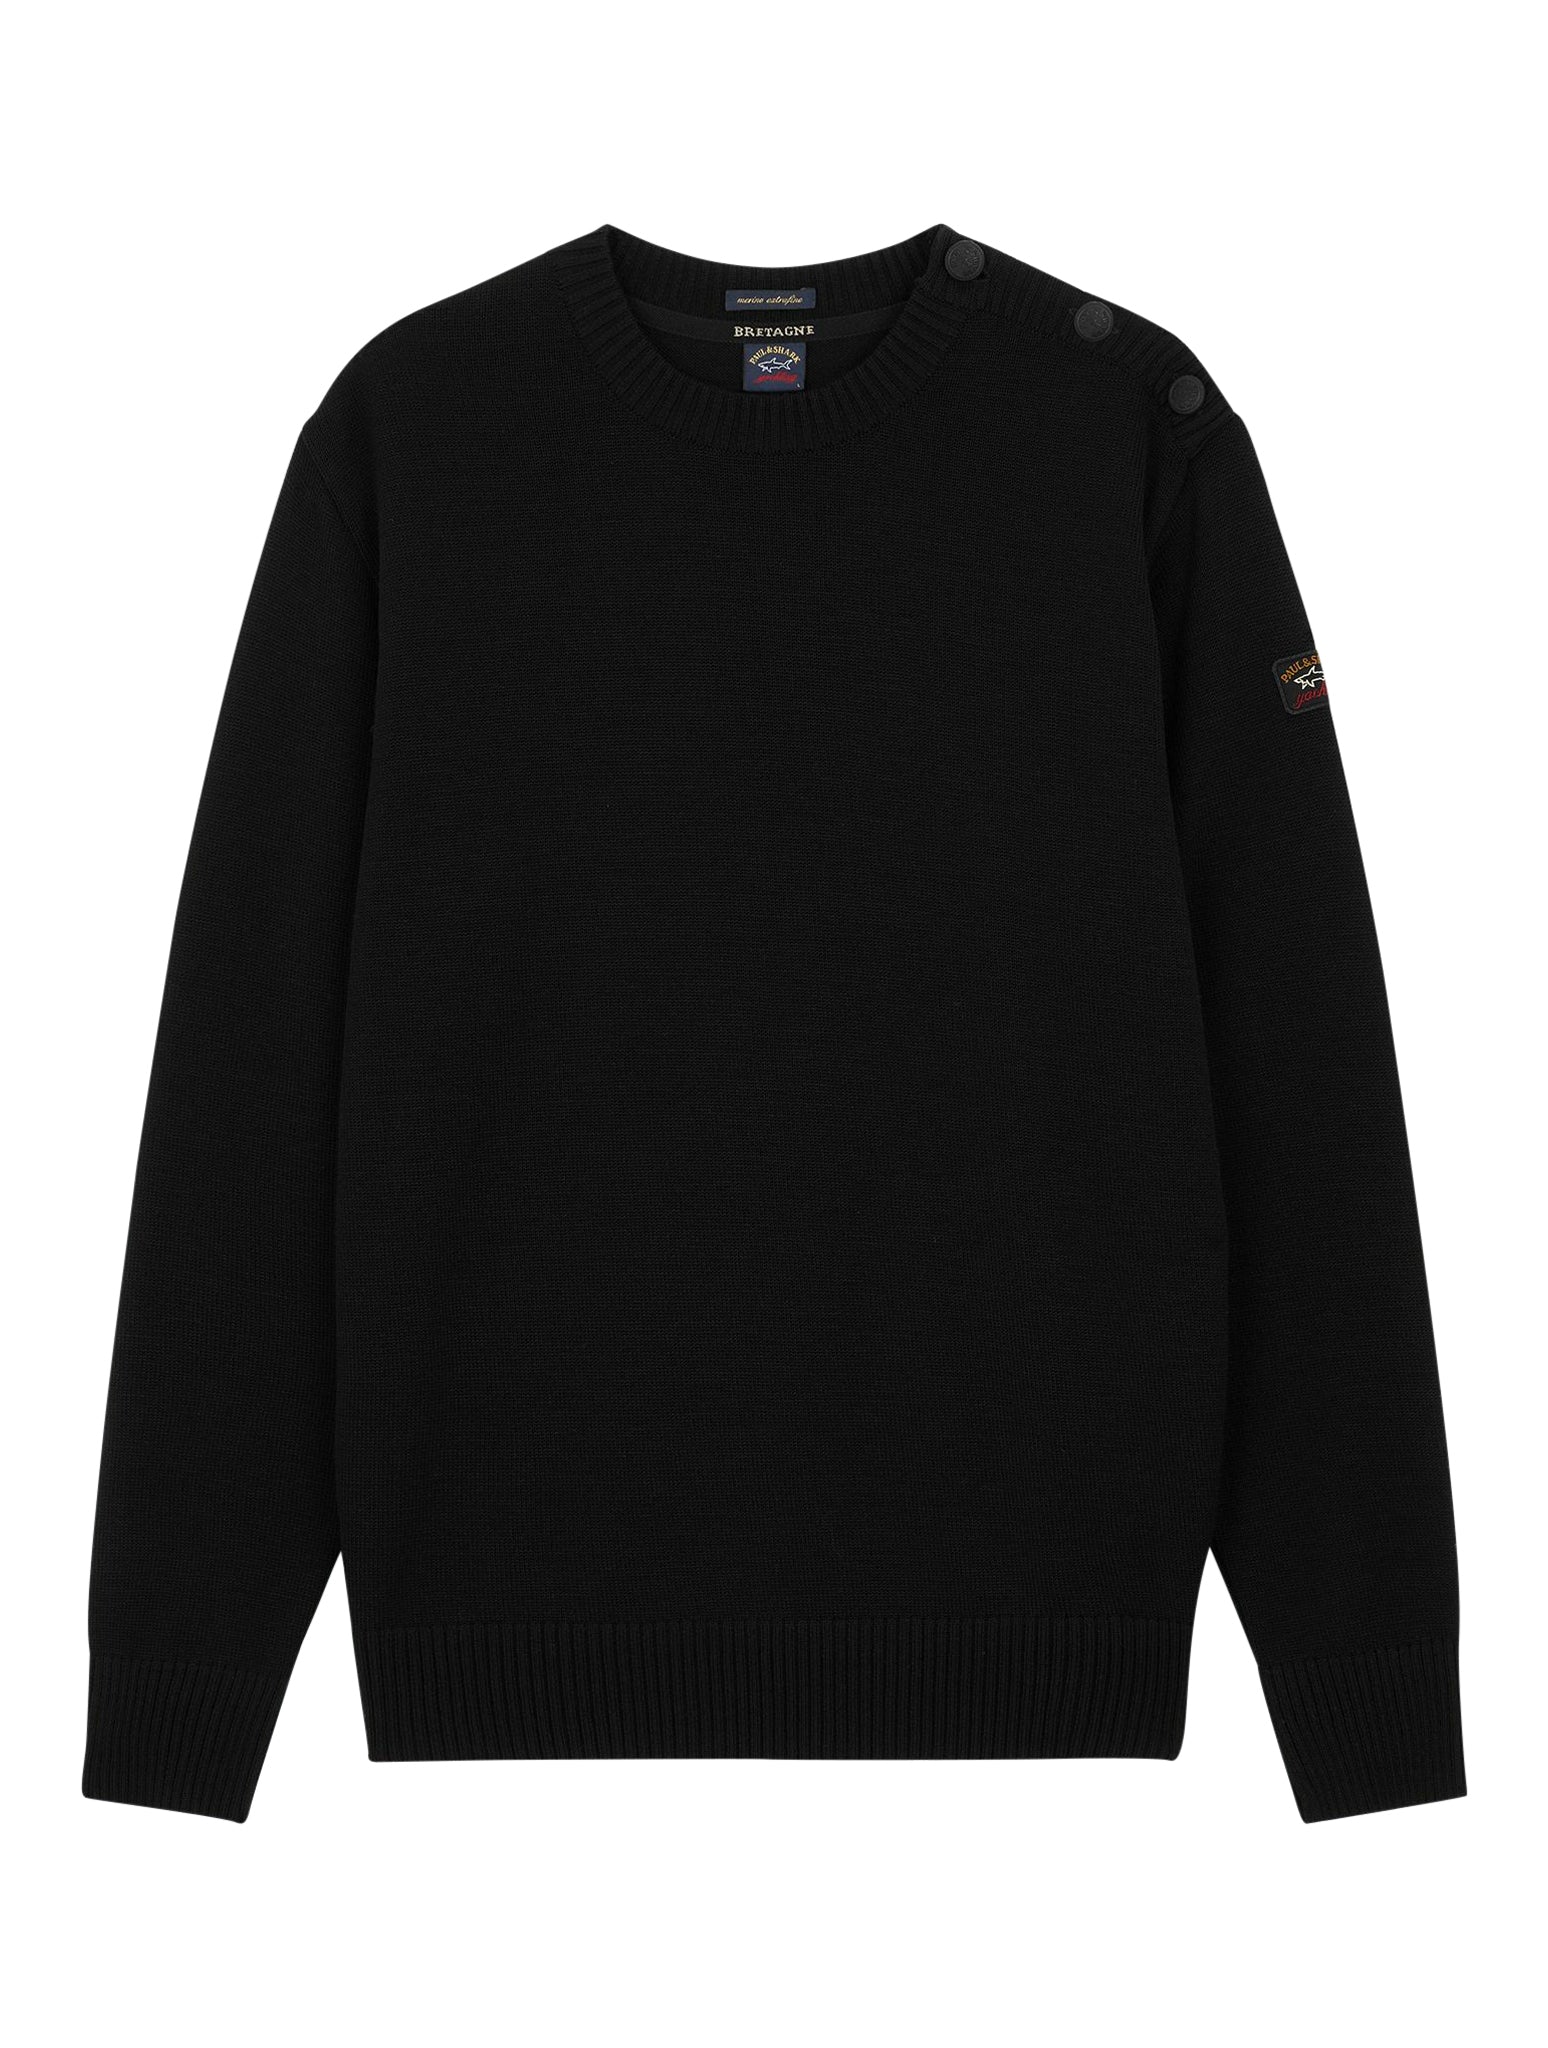 CREW NECK IN BRITAIN WOOL WITH ICONIC BADGE